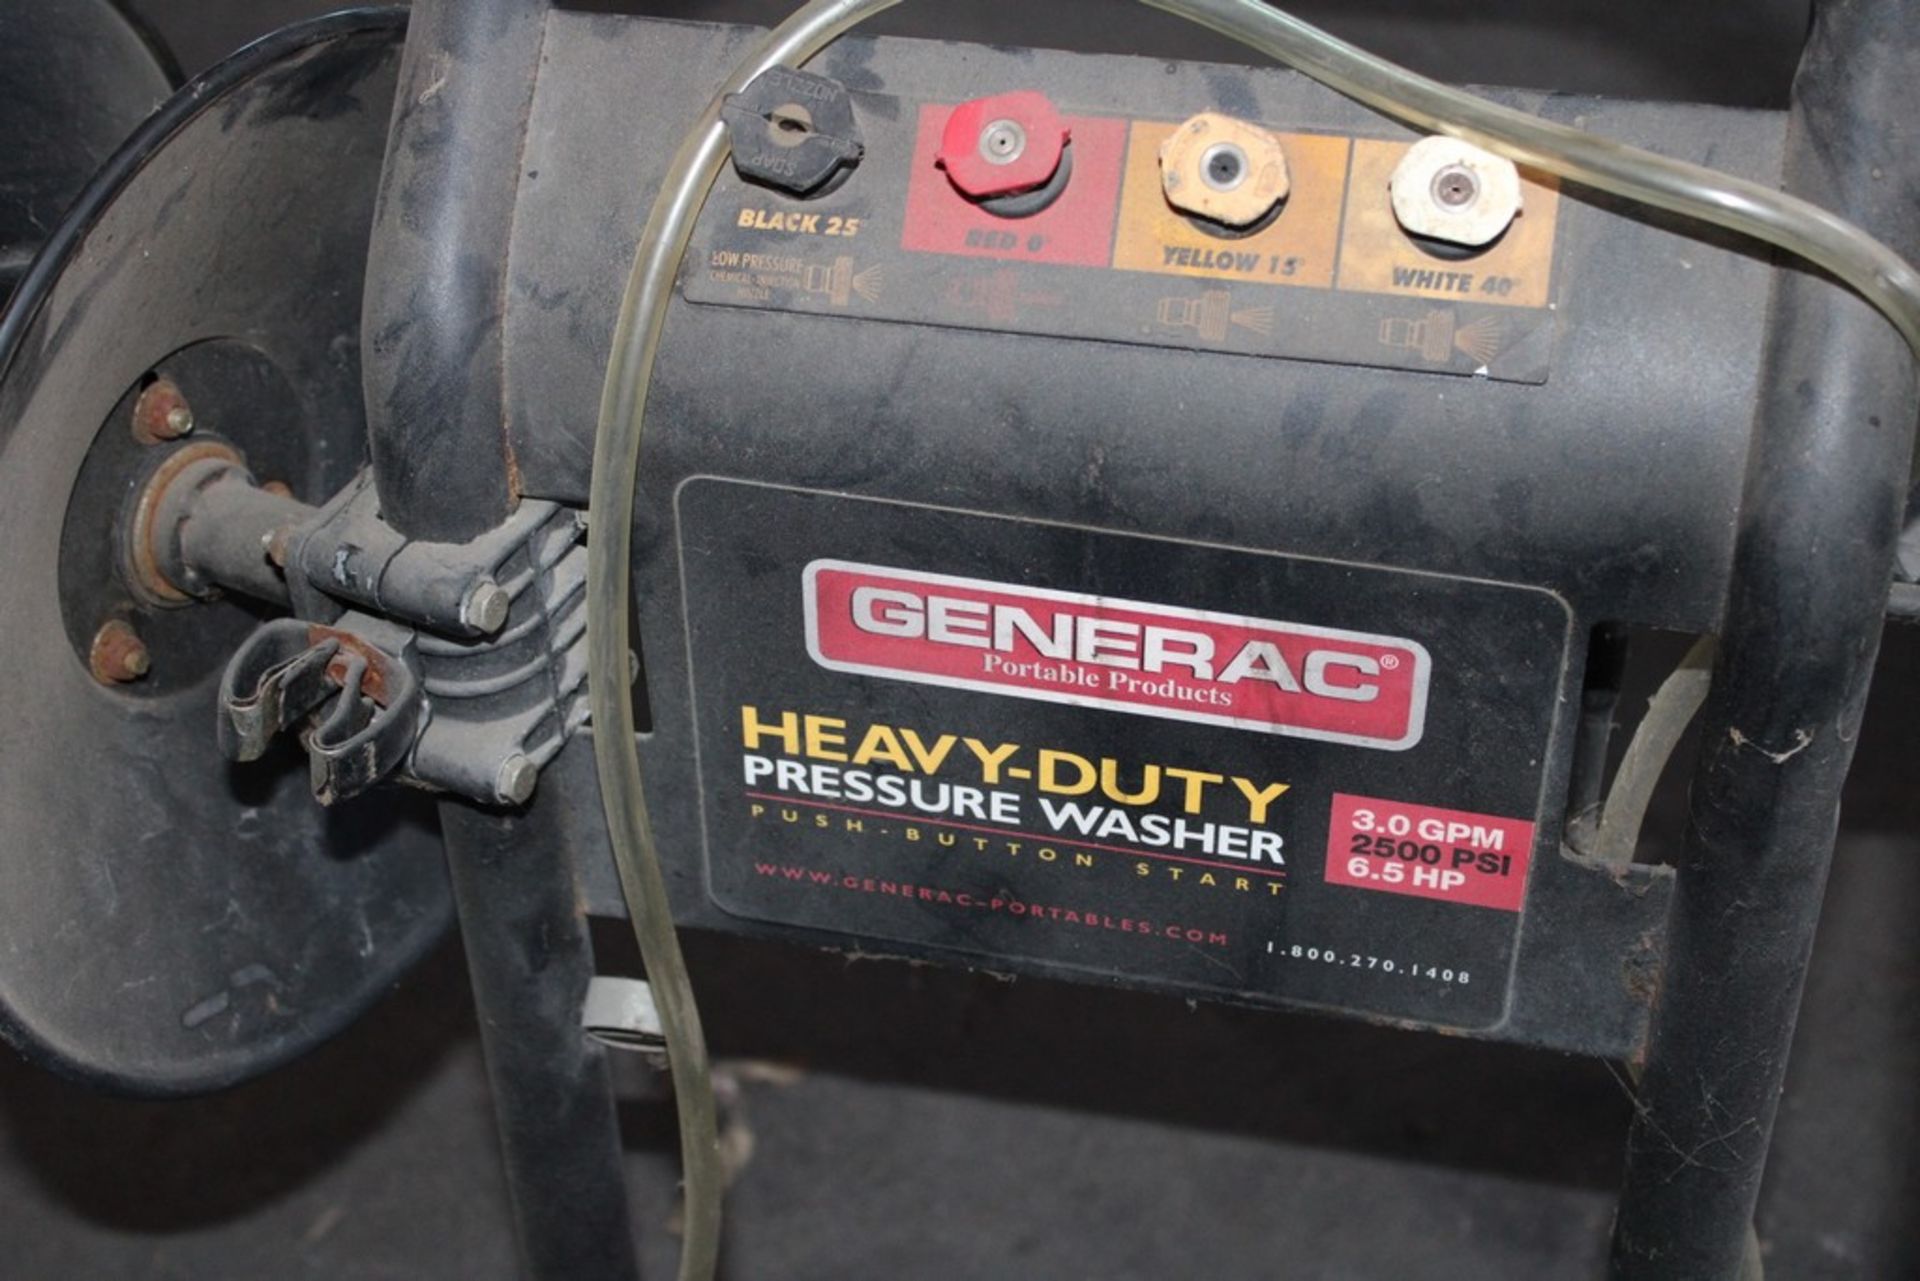 GENERAC 2,500 PSI HEAVY DUTY POWER WASHER, WITH INTEK PRO 206 6.5 HP GAS ENGINE - Image 4 of 4